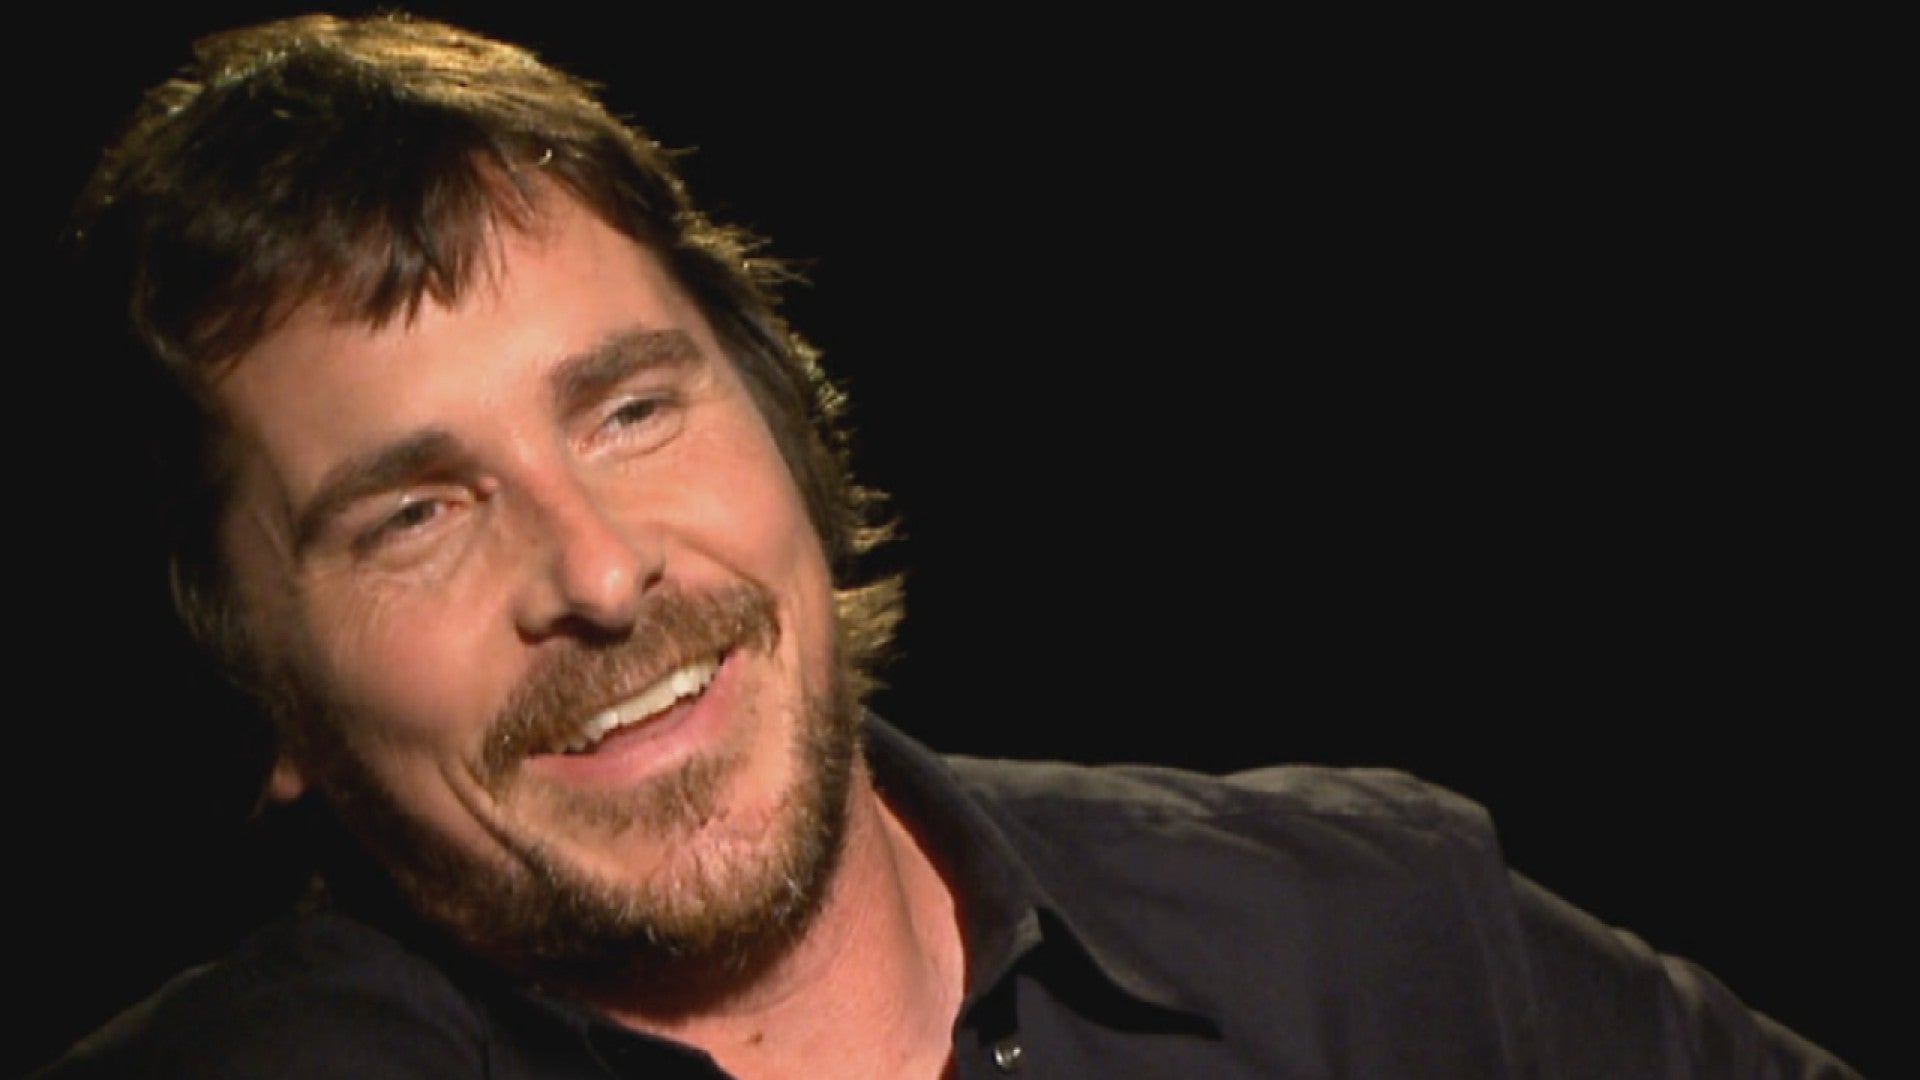 PHOTOS] If the World Cup Were a Movie: Christian Bale as Lionel